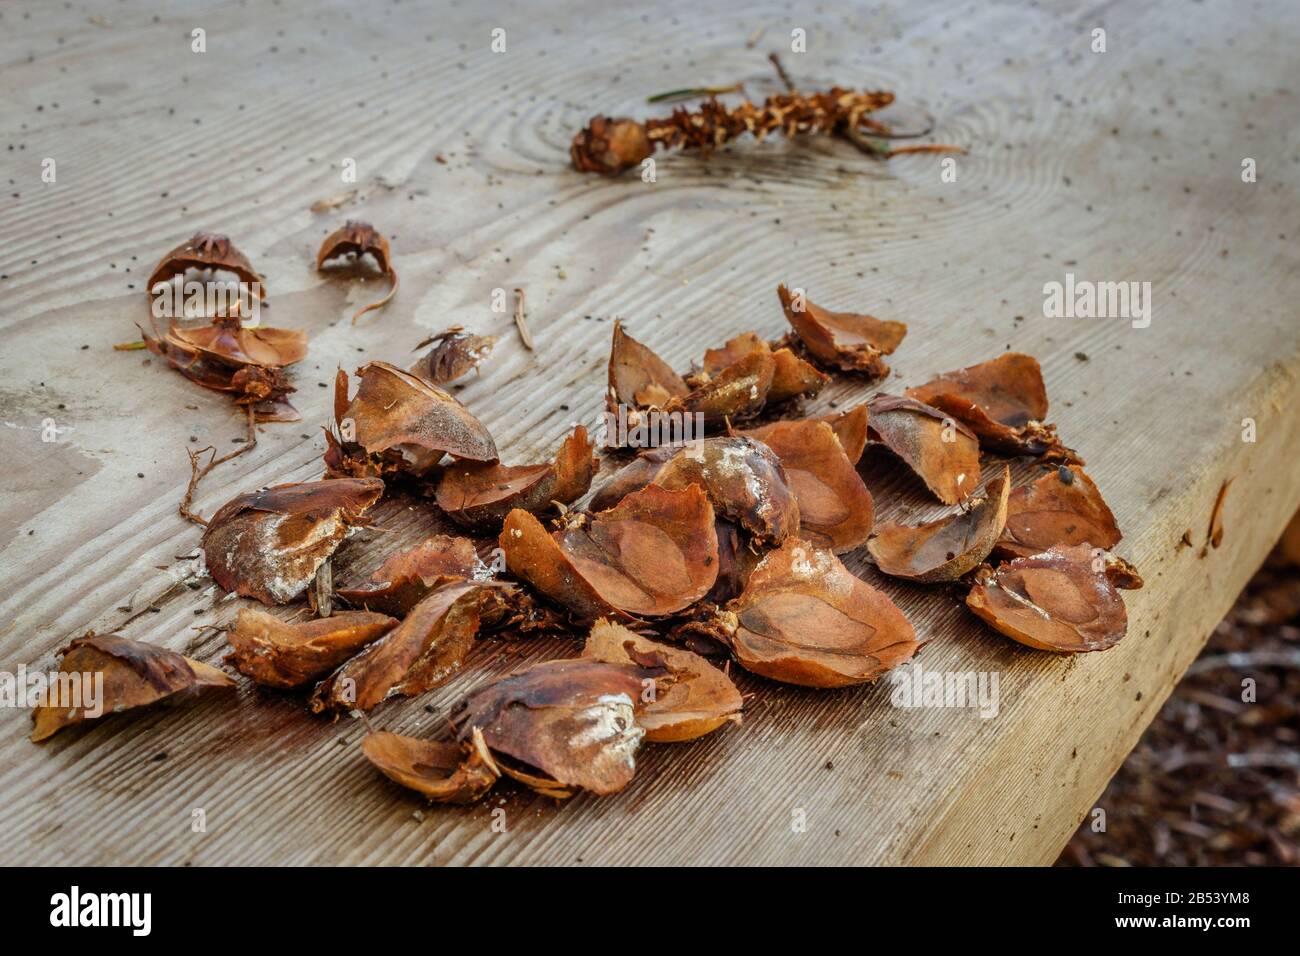 Left over from a Red squirrel's meal, discarded seed coats and the central stem of a Douglas fir cone lie on the seat of a rough wooden bench. Stock Photo